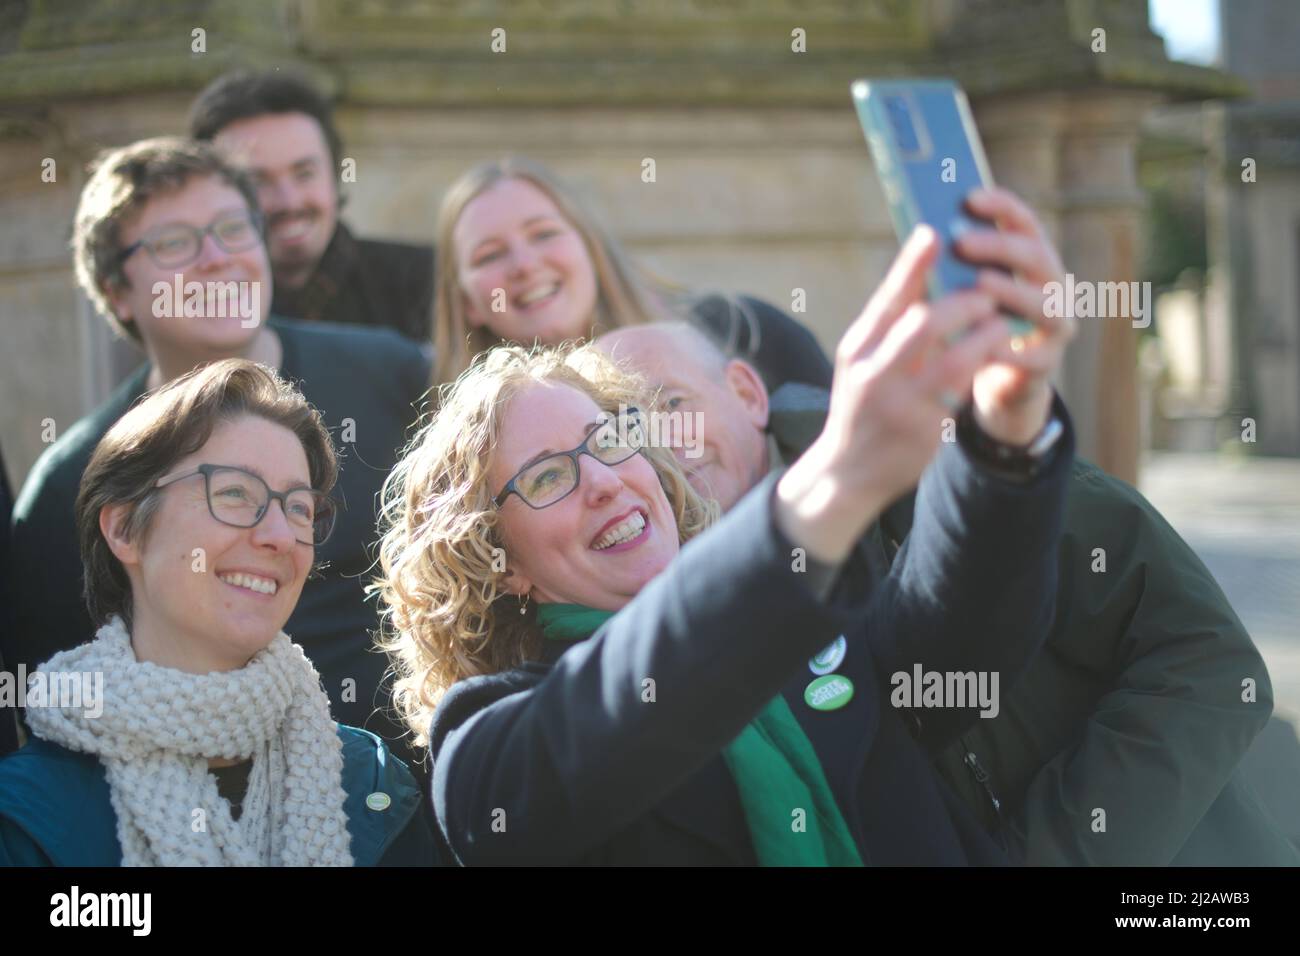 Linlithgow Scotland, UK March 31 2022. Scottish Green Party co-leaders Patrick Harvie and Lorna Slater are joined by candidates in the Town Square to launch the party’s local election campaign. credit sst/alamy live news Stock Photo